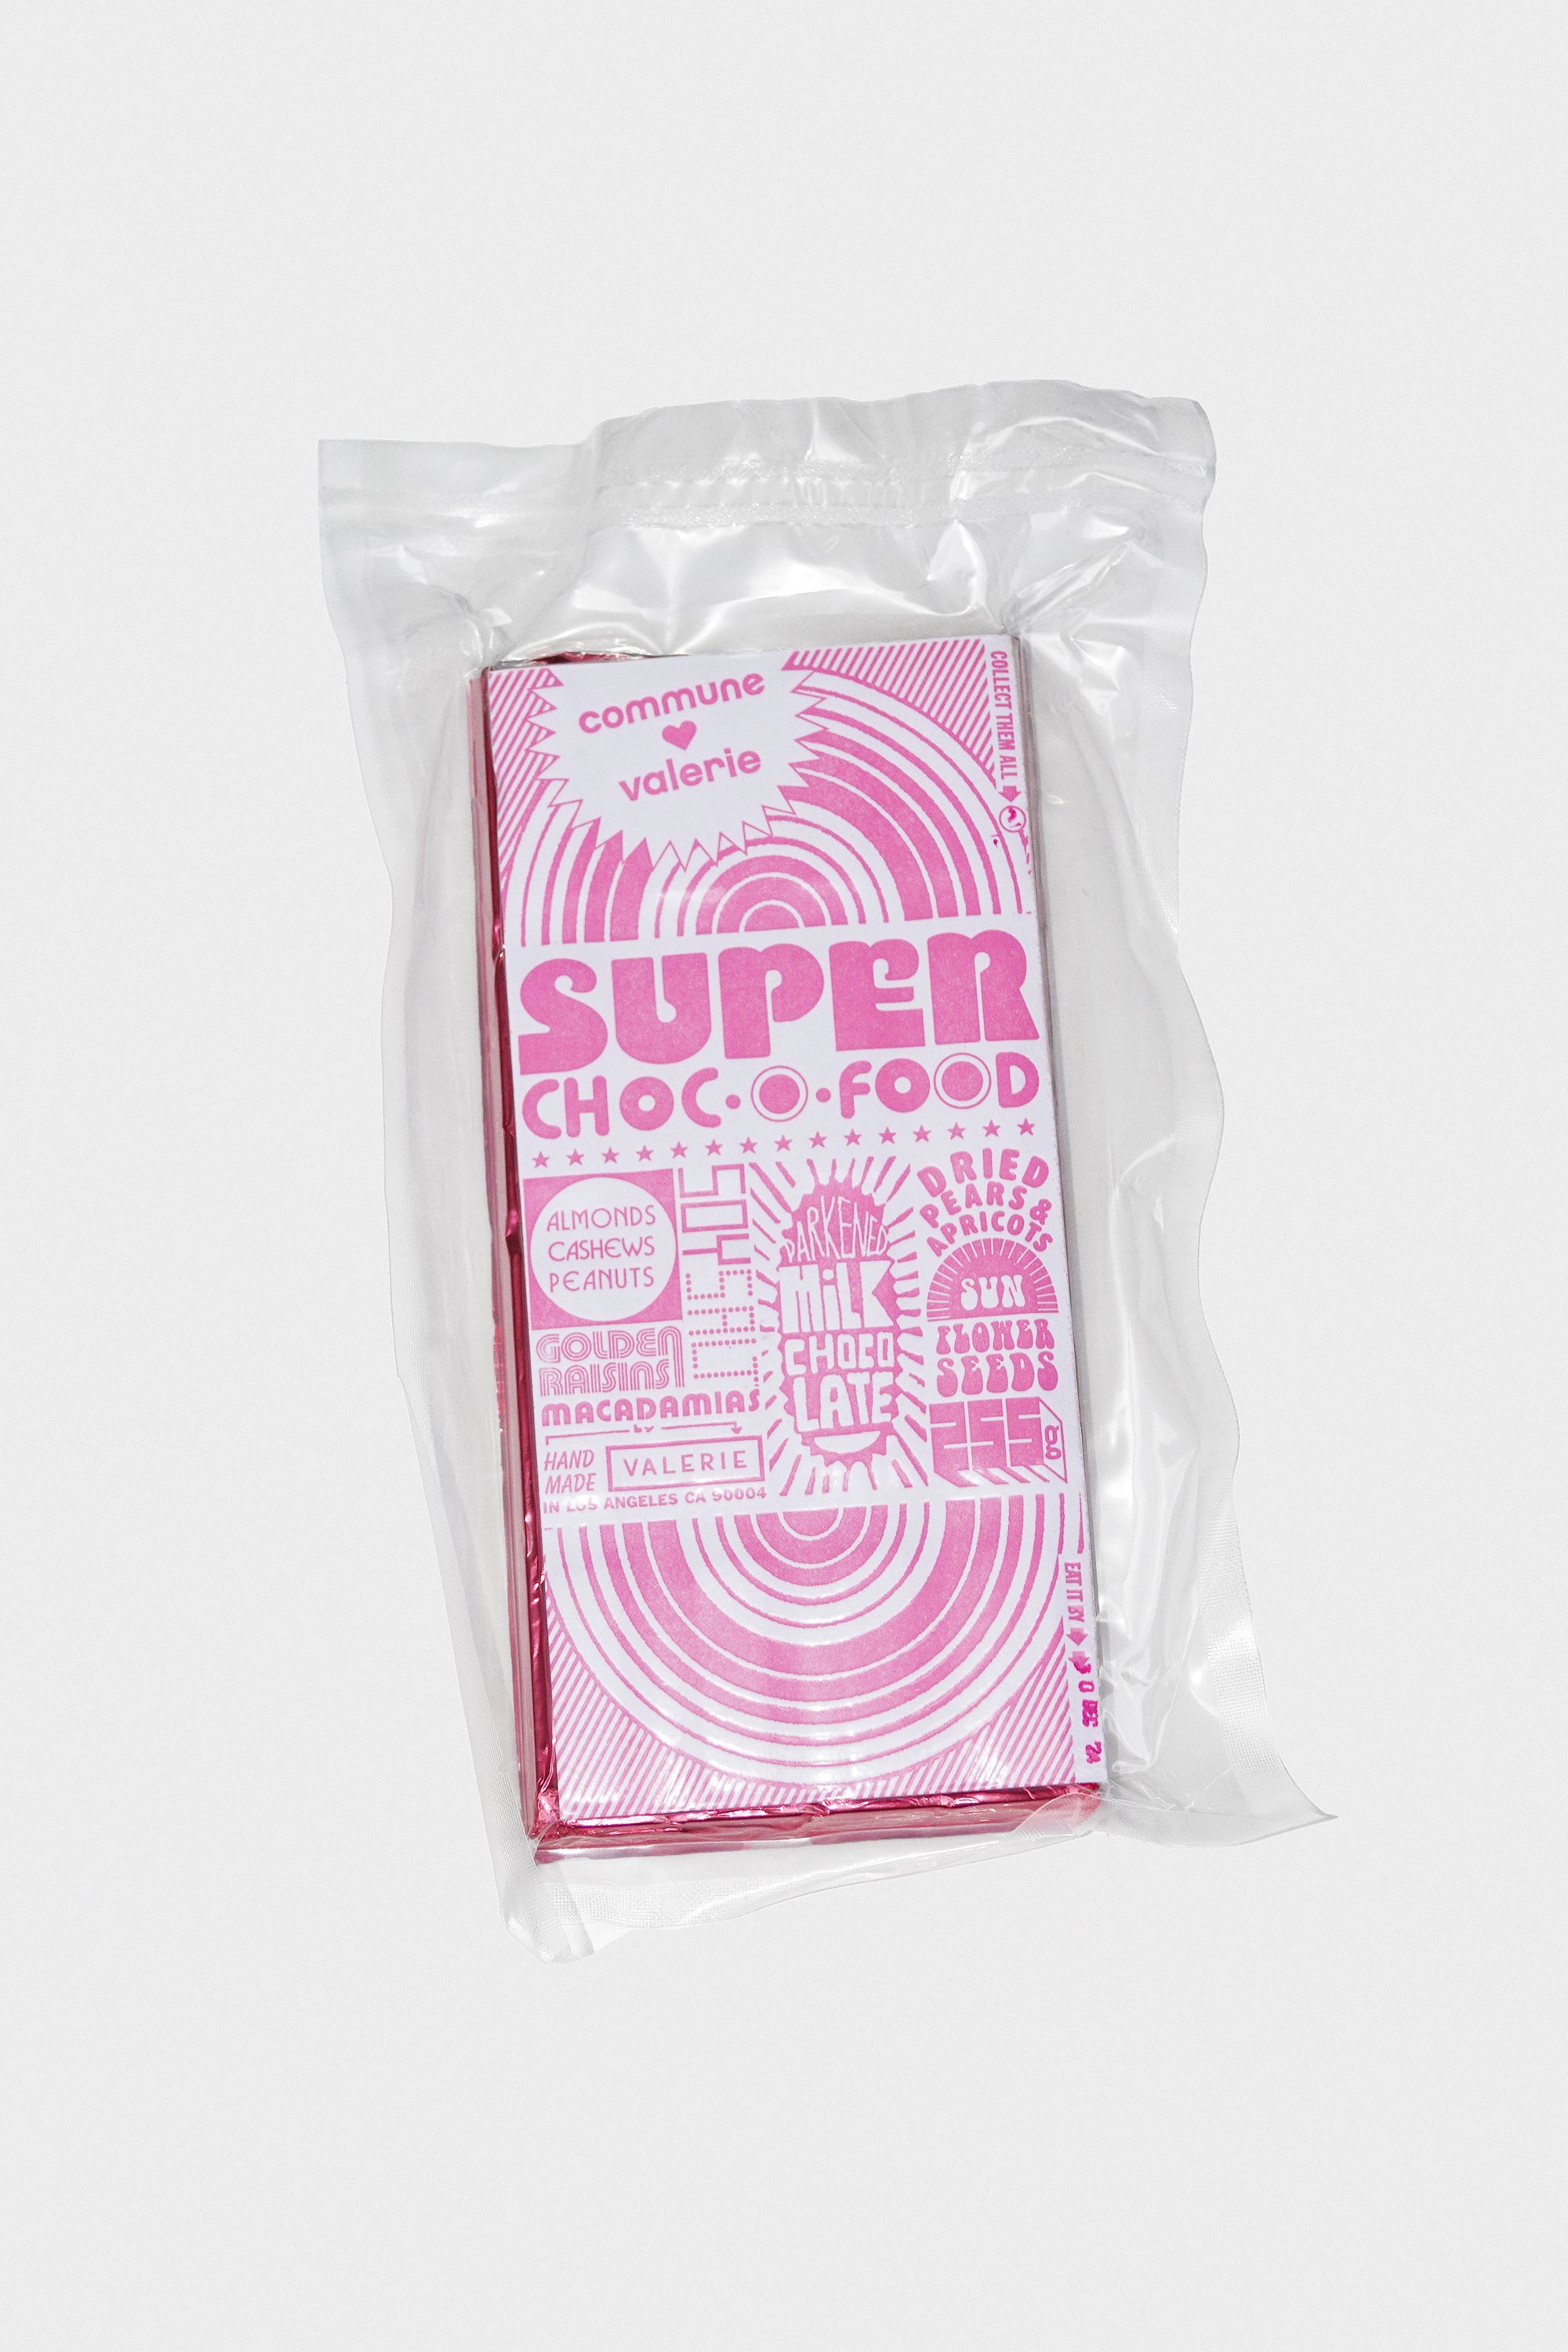 Super Choc-O-Food Bar by Commune x Valerie Confections